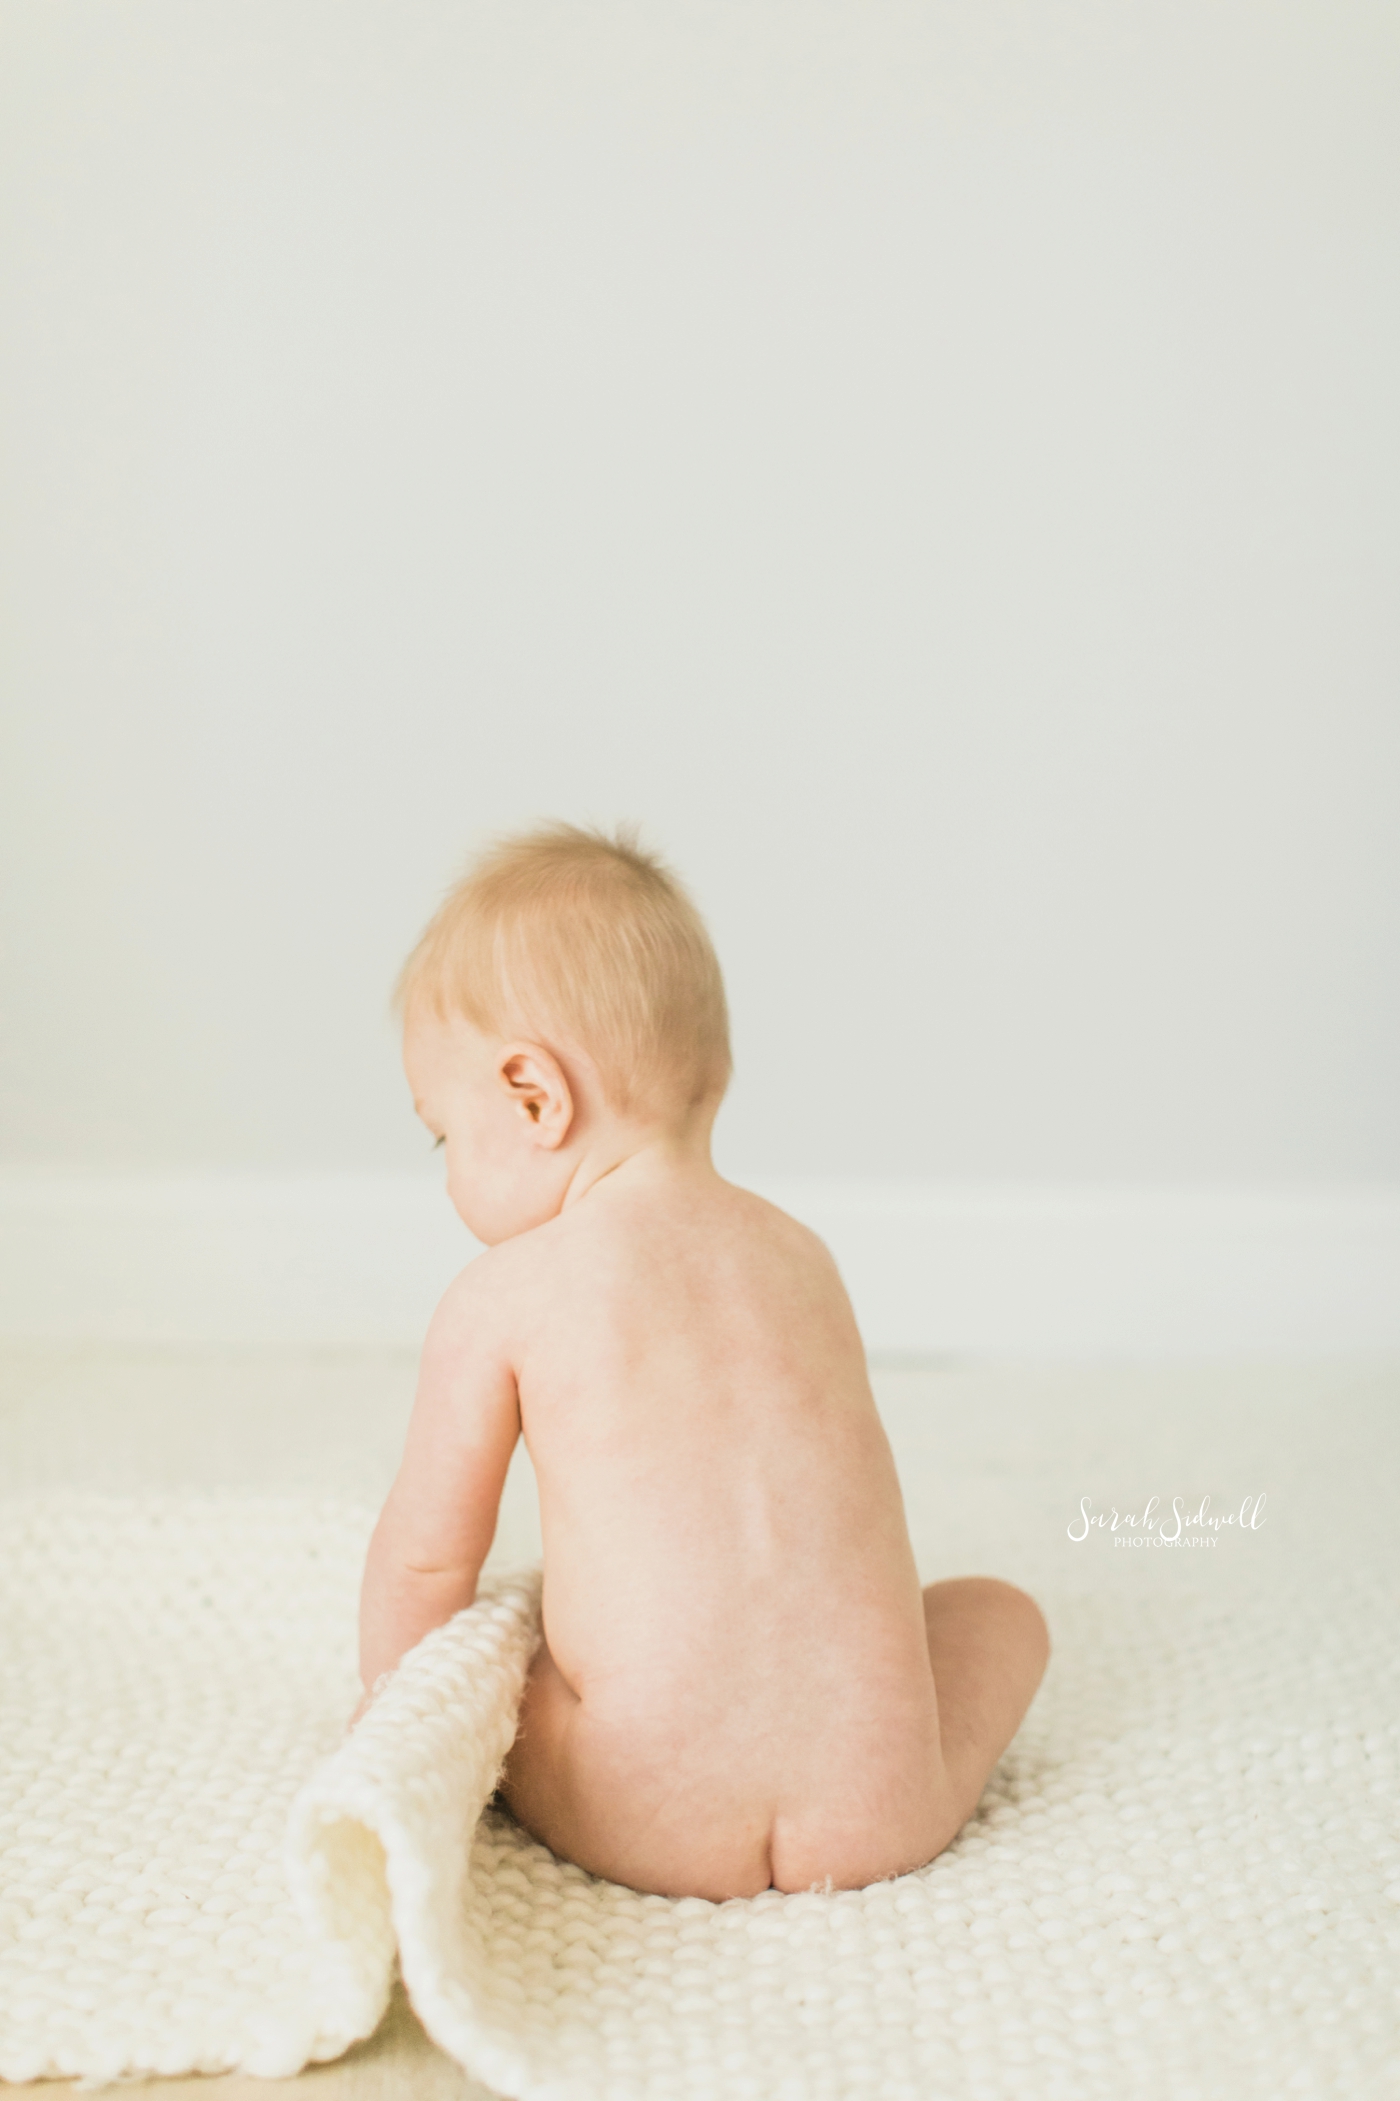 A baby sits on the floor with his bottom showing. 